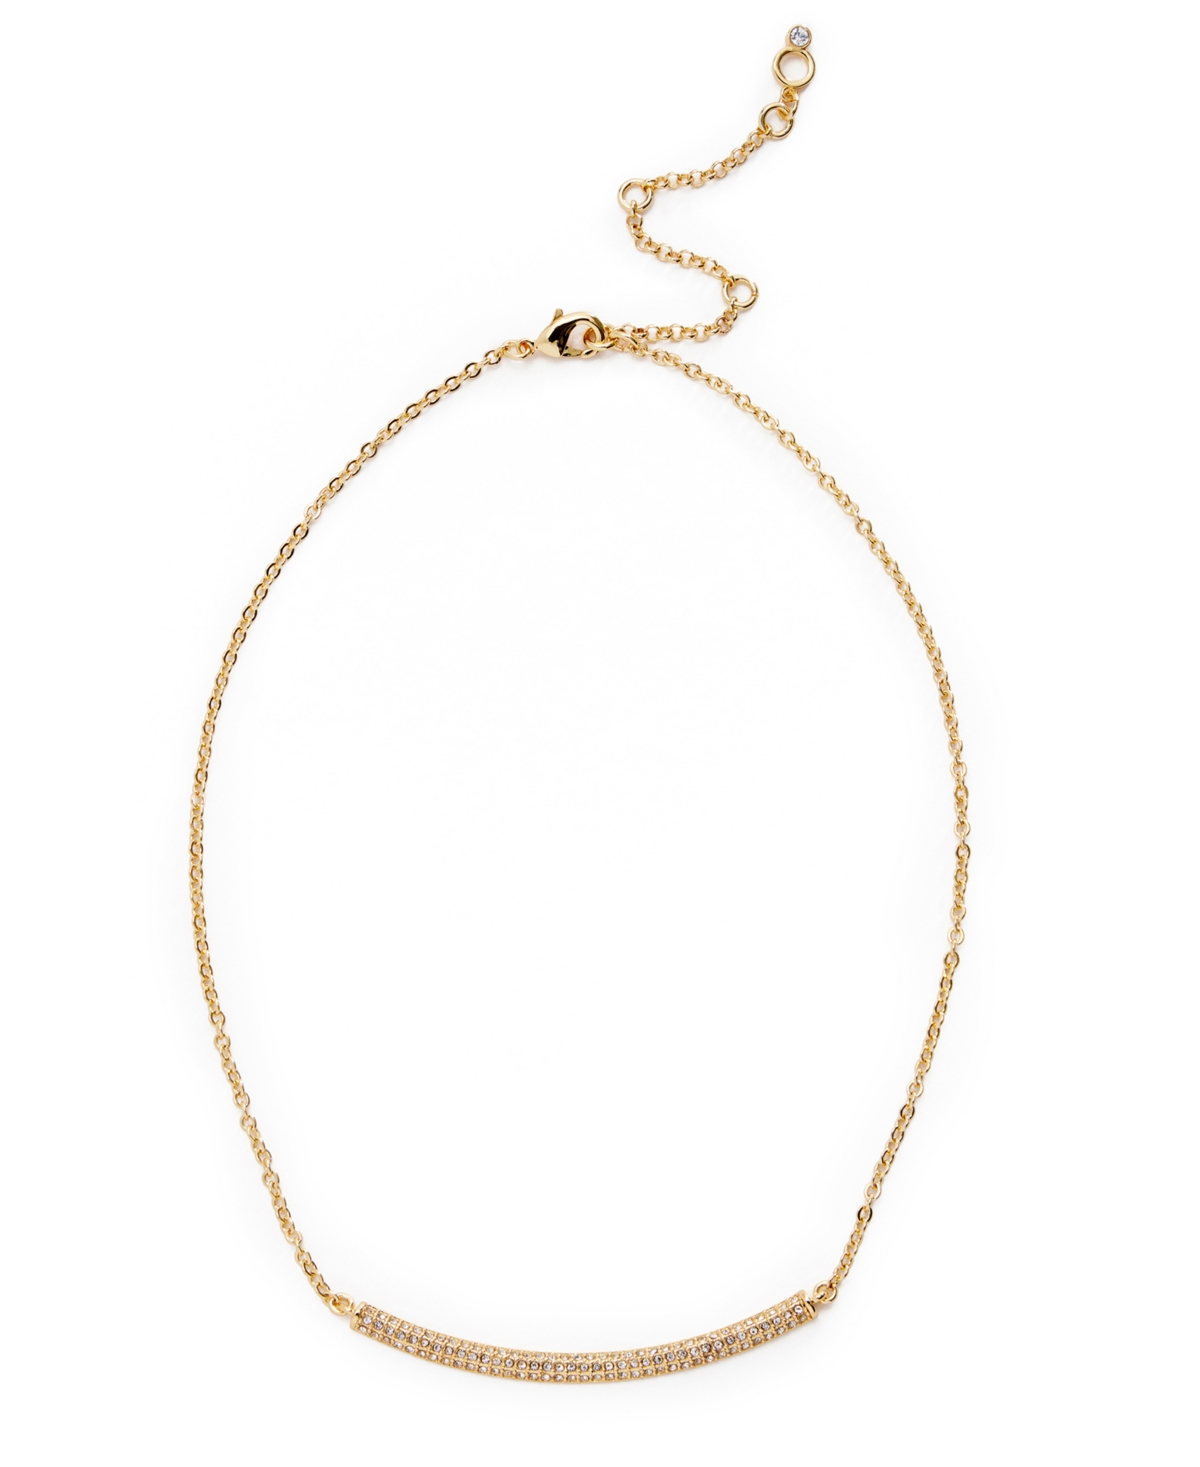 Faux Stone Pave Bar Delicate Necklace - Crystal, Gold